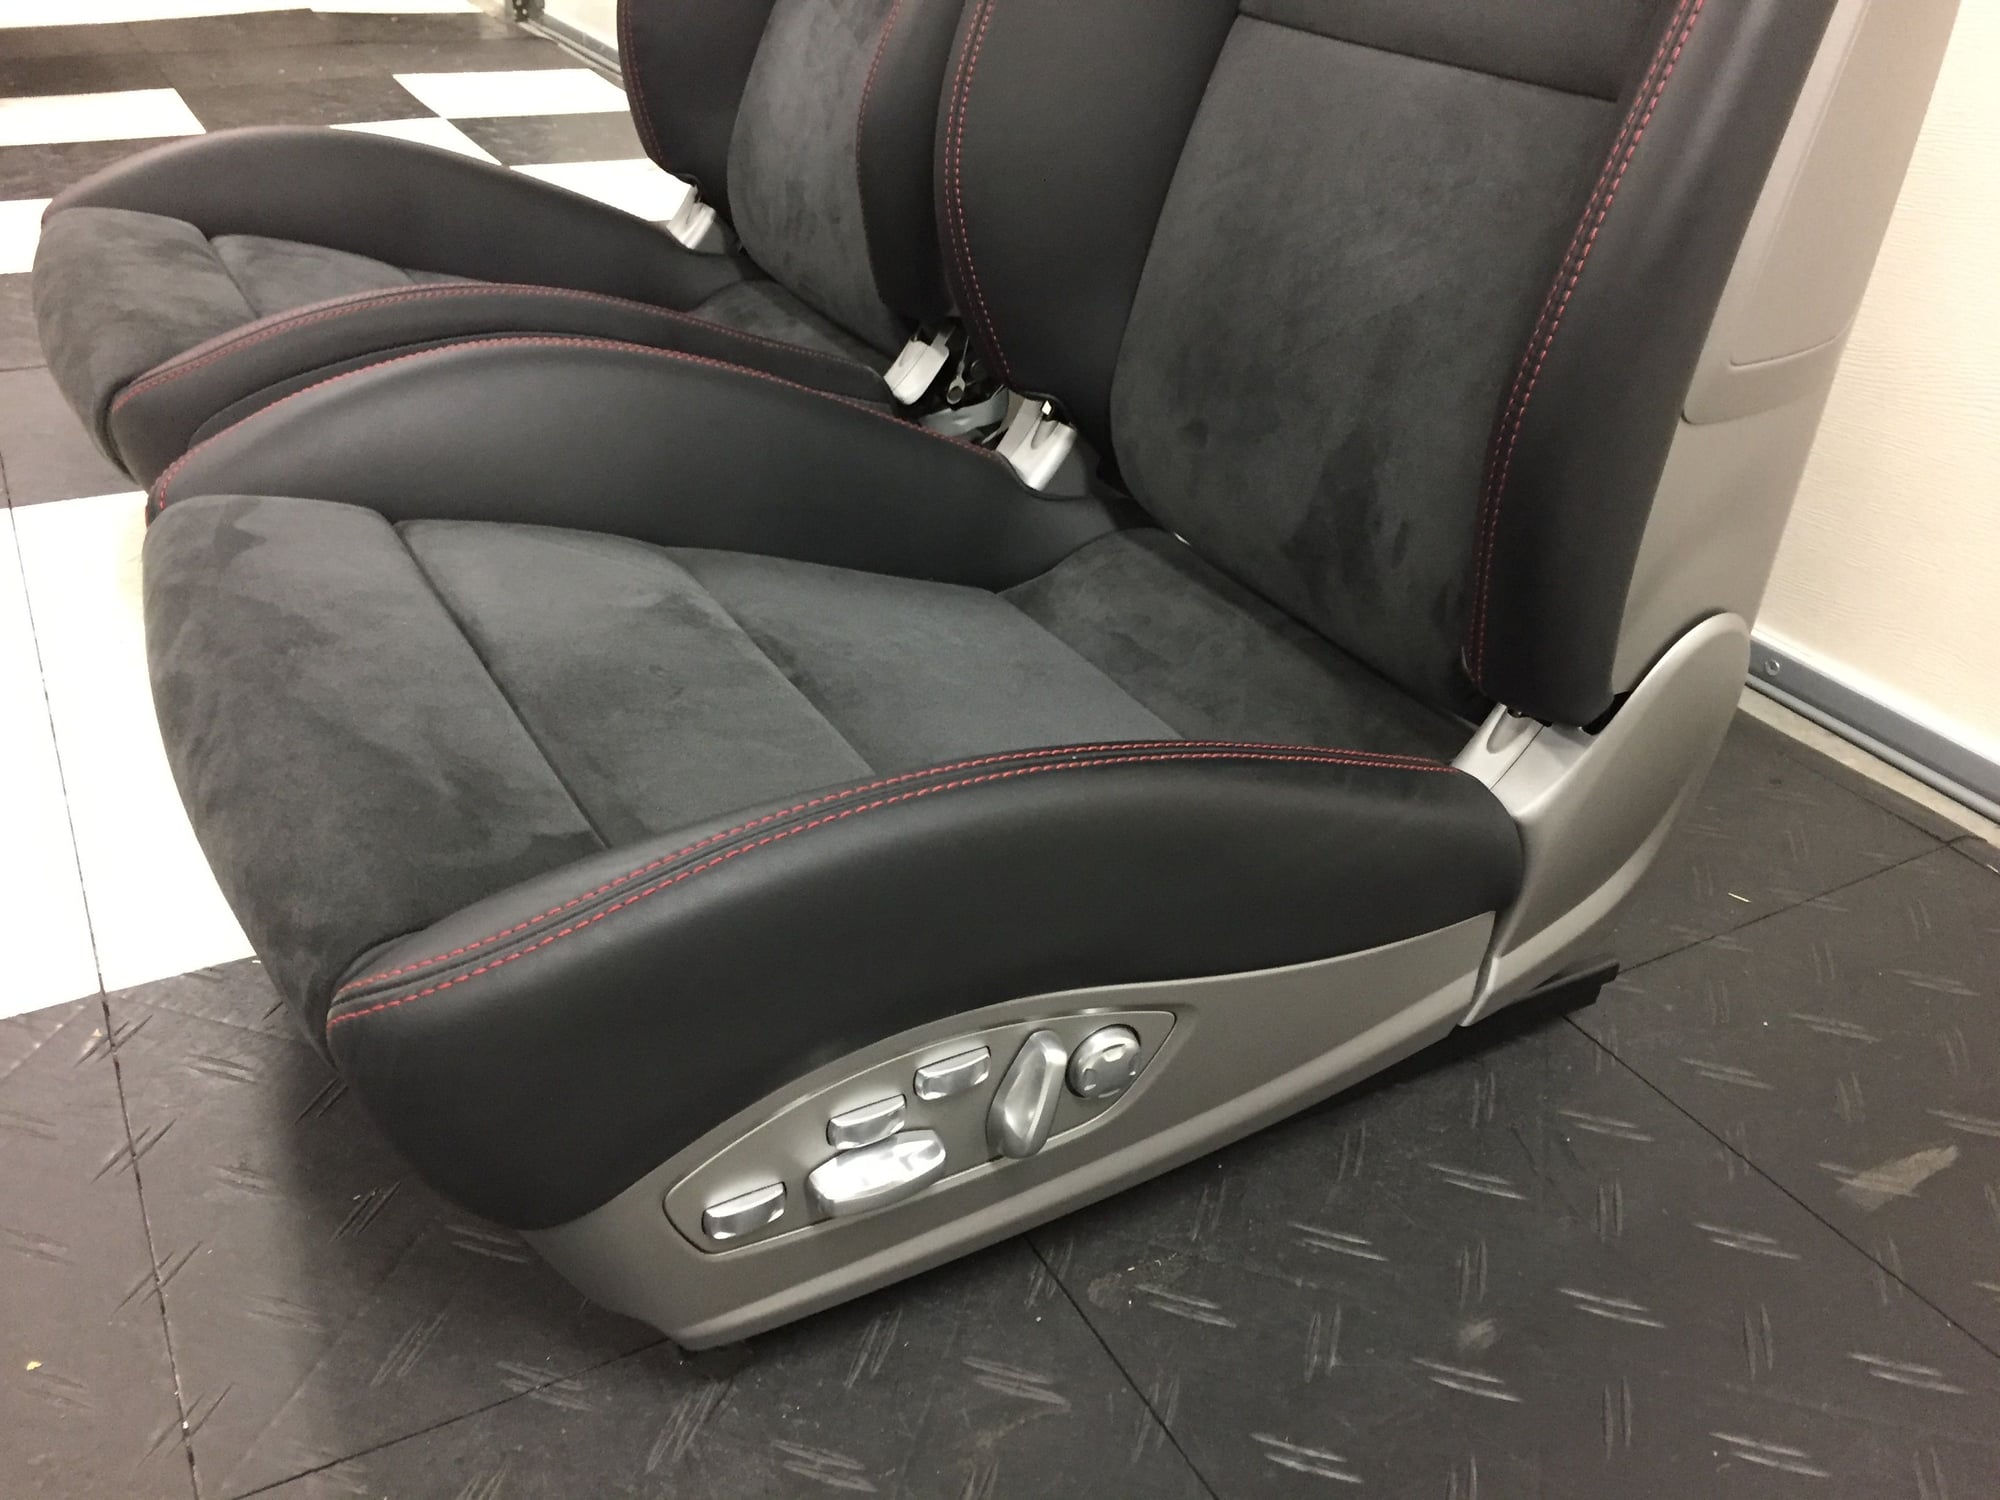 Interior/Upholstery - FS: 991 GT3 18 - Way Sofa Seats with RED stitching - Used - 2014 to 2019 Porsche GT3 - Irvine, CA 92614, United States